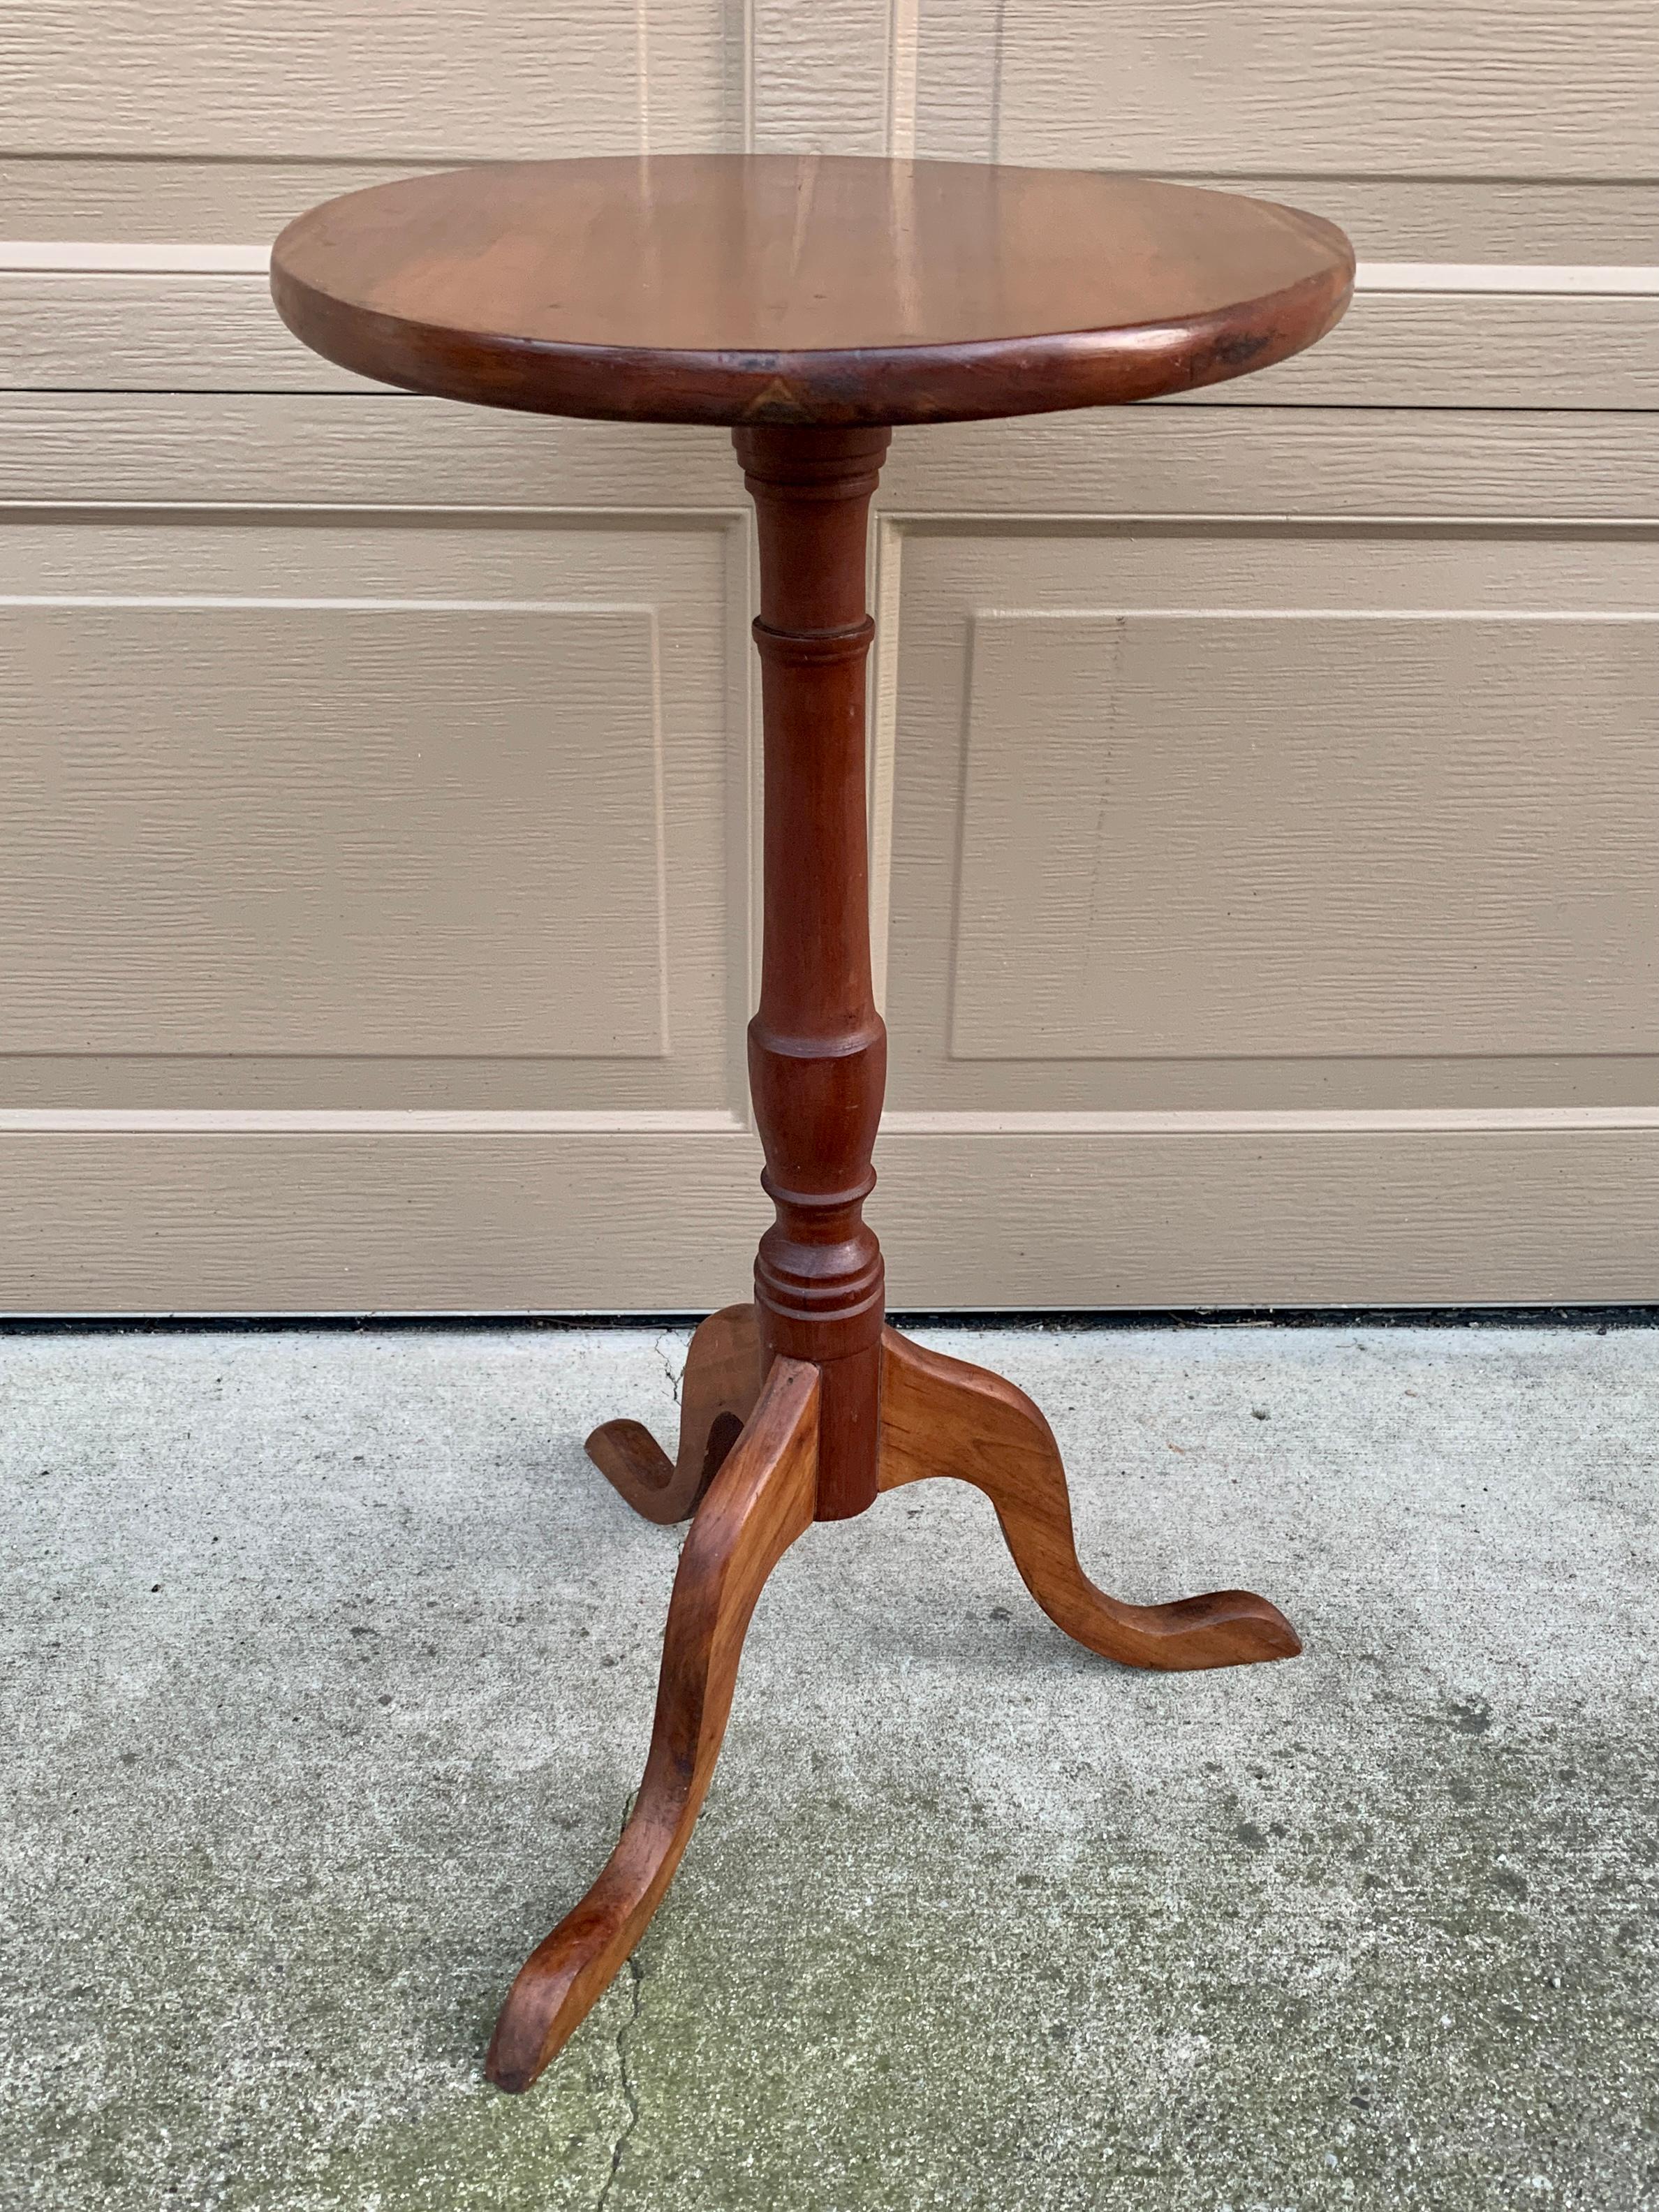 Antique American Colonial Cherry Candle Stand or Side Table, Mid 19th Century 5